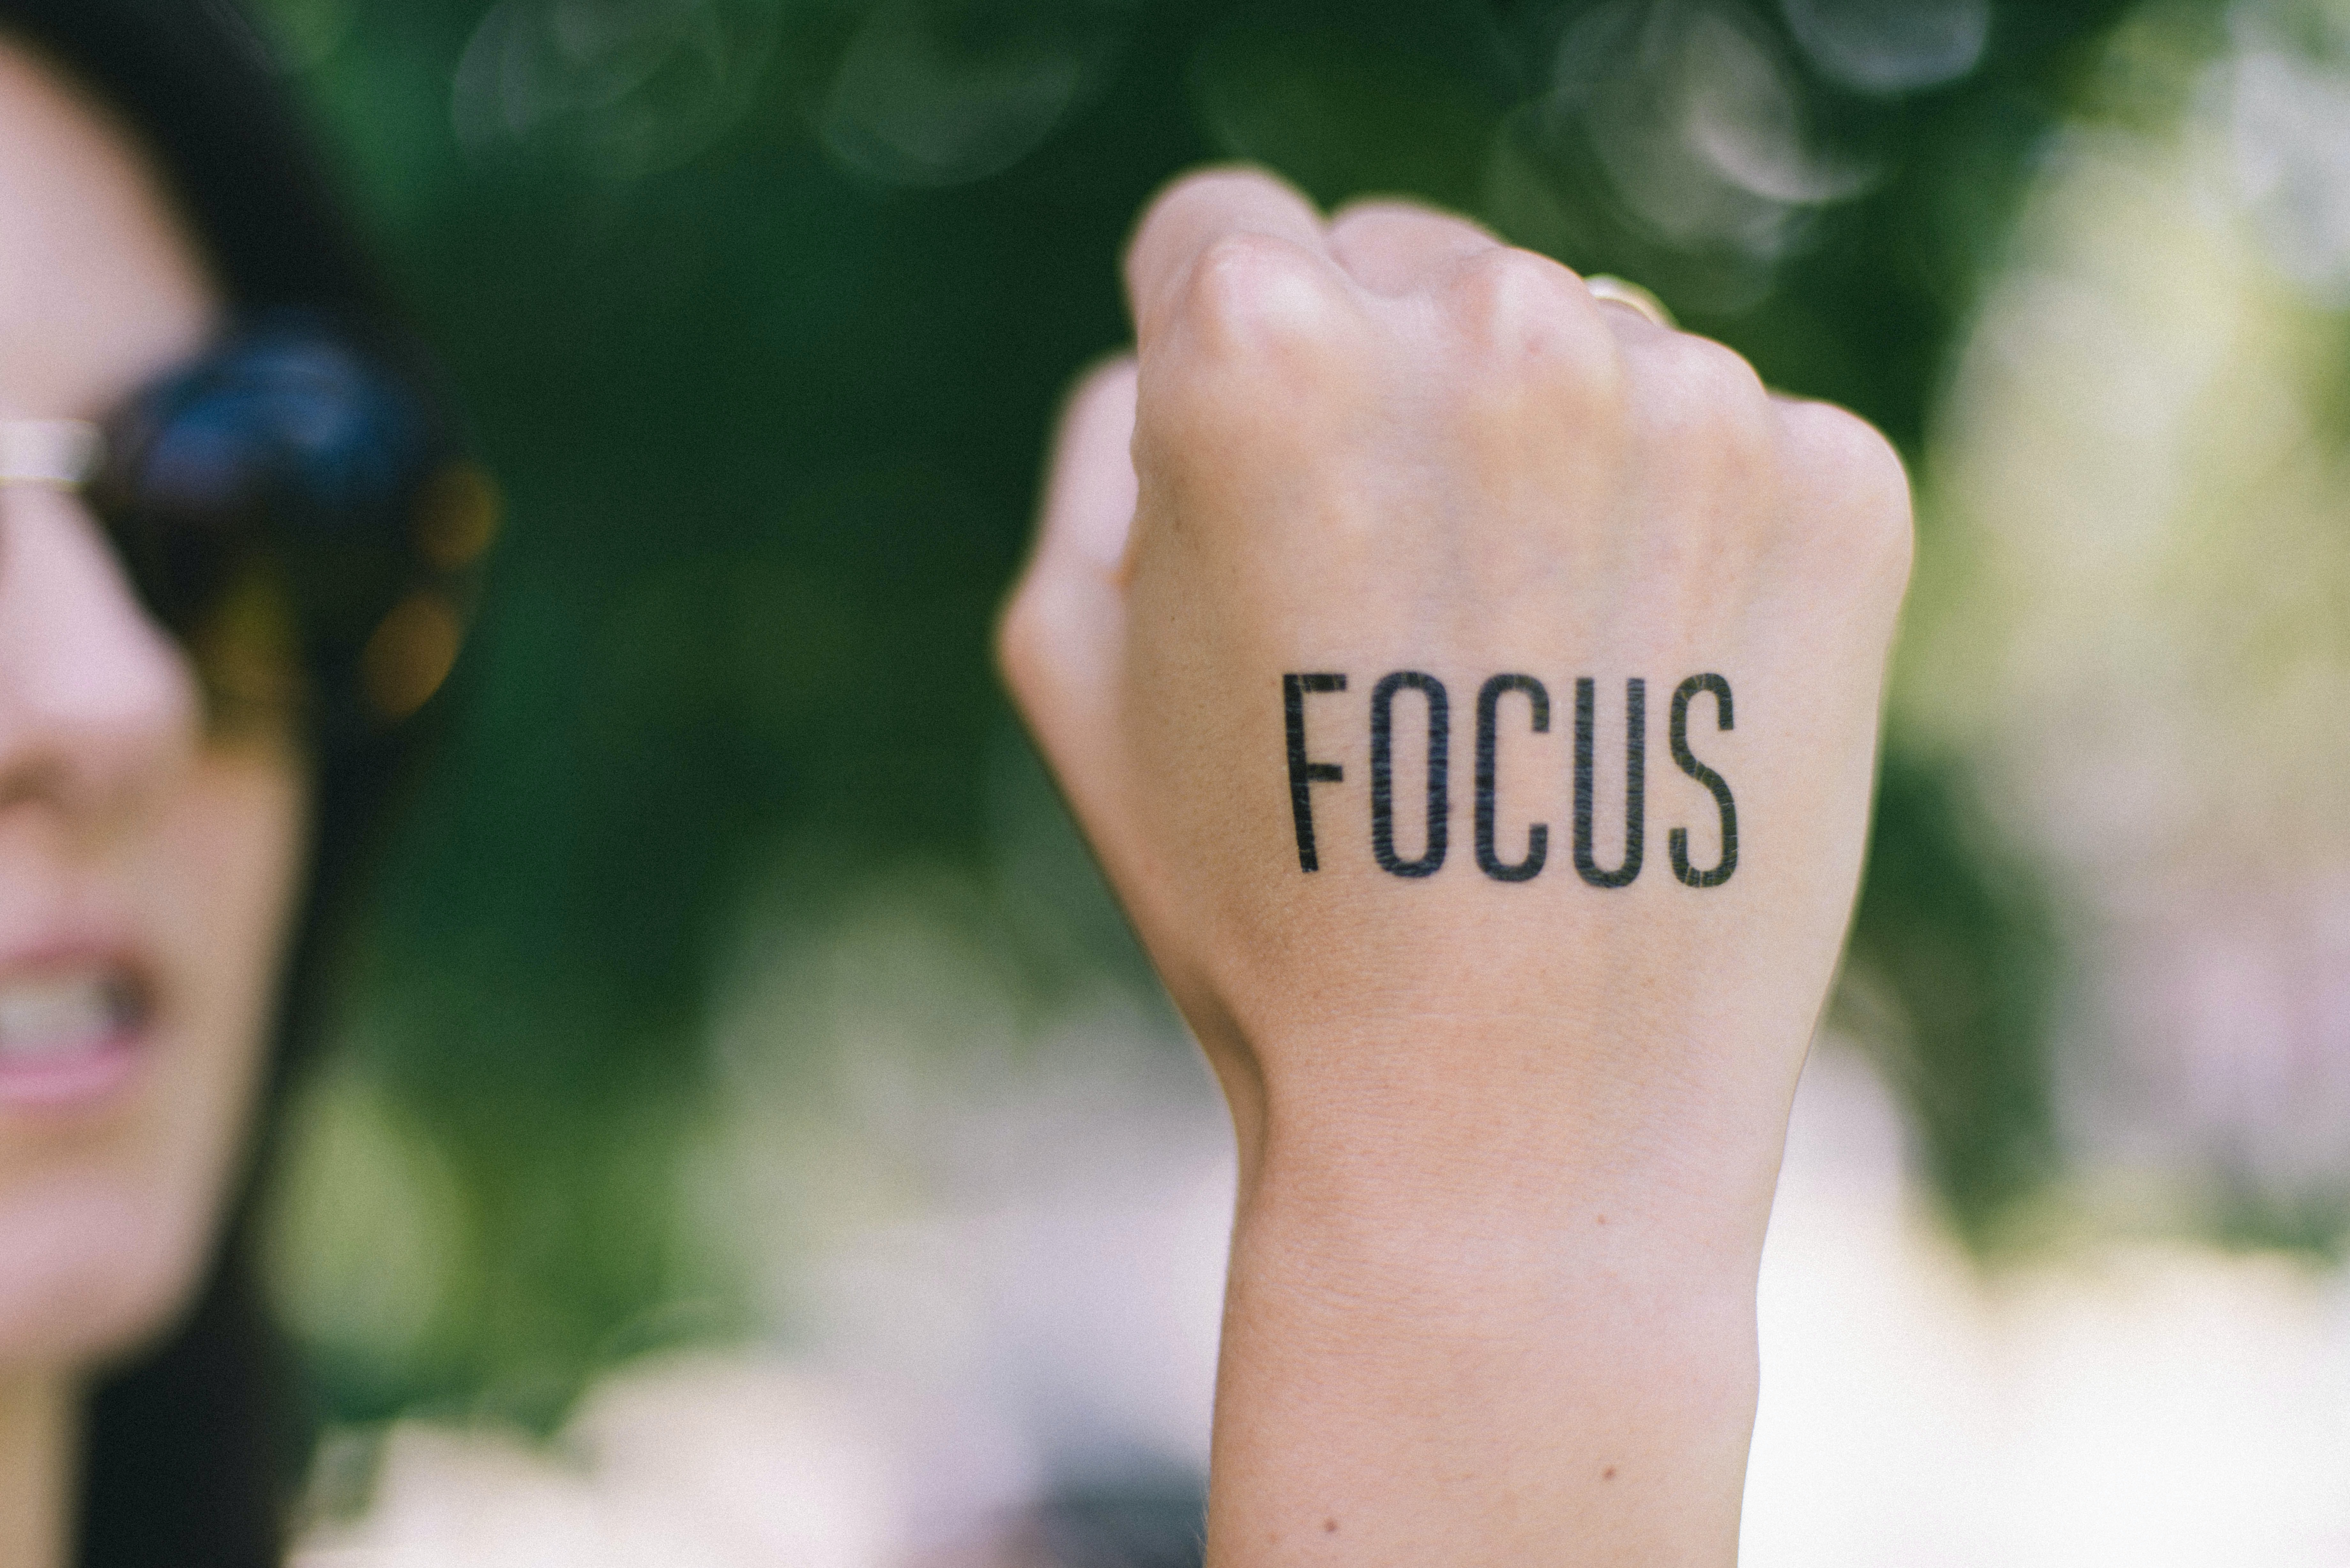 A women with focus written on her hand